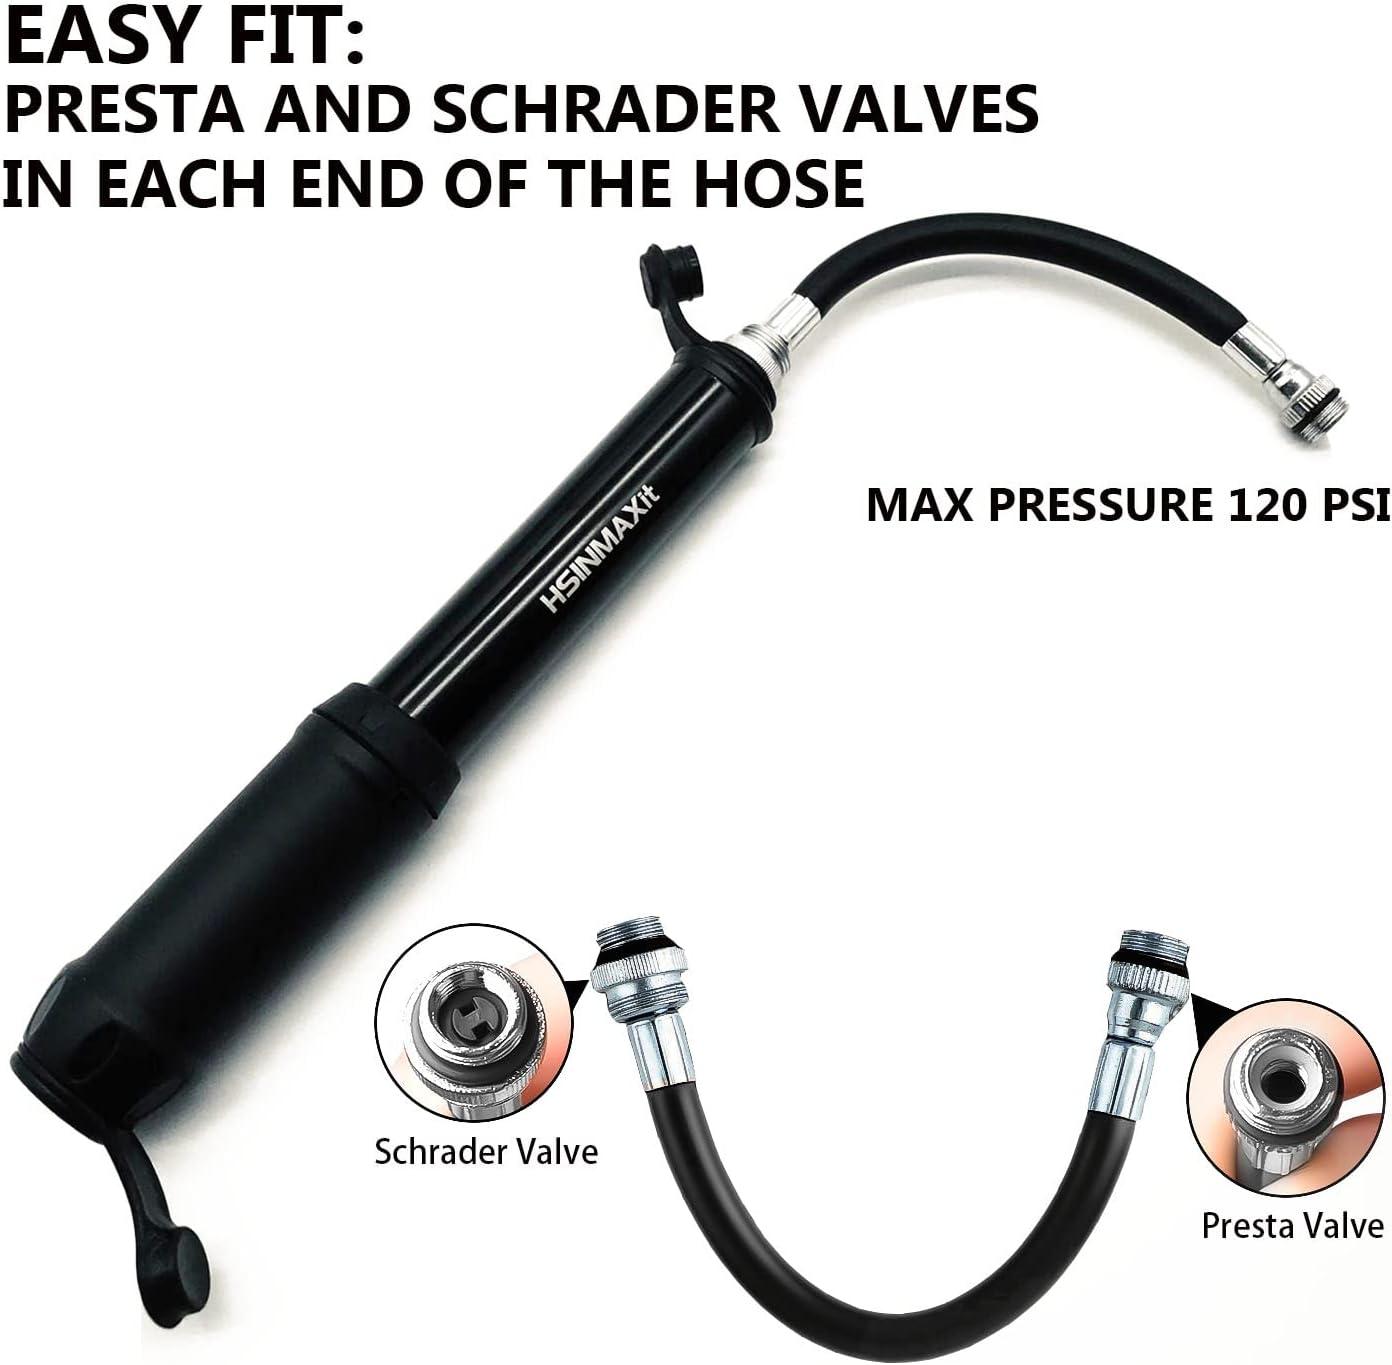  All-in-One Bike Pump Kit - Compact and Portable 120 PSI Mini  Pump with Gauge, Needle, Patch Kit, Valve Caps and Frame Mount for Presta &  Schrader : Sports & Outdoors